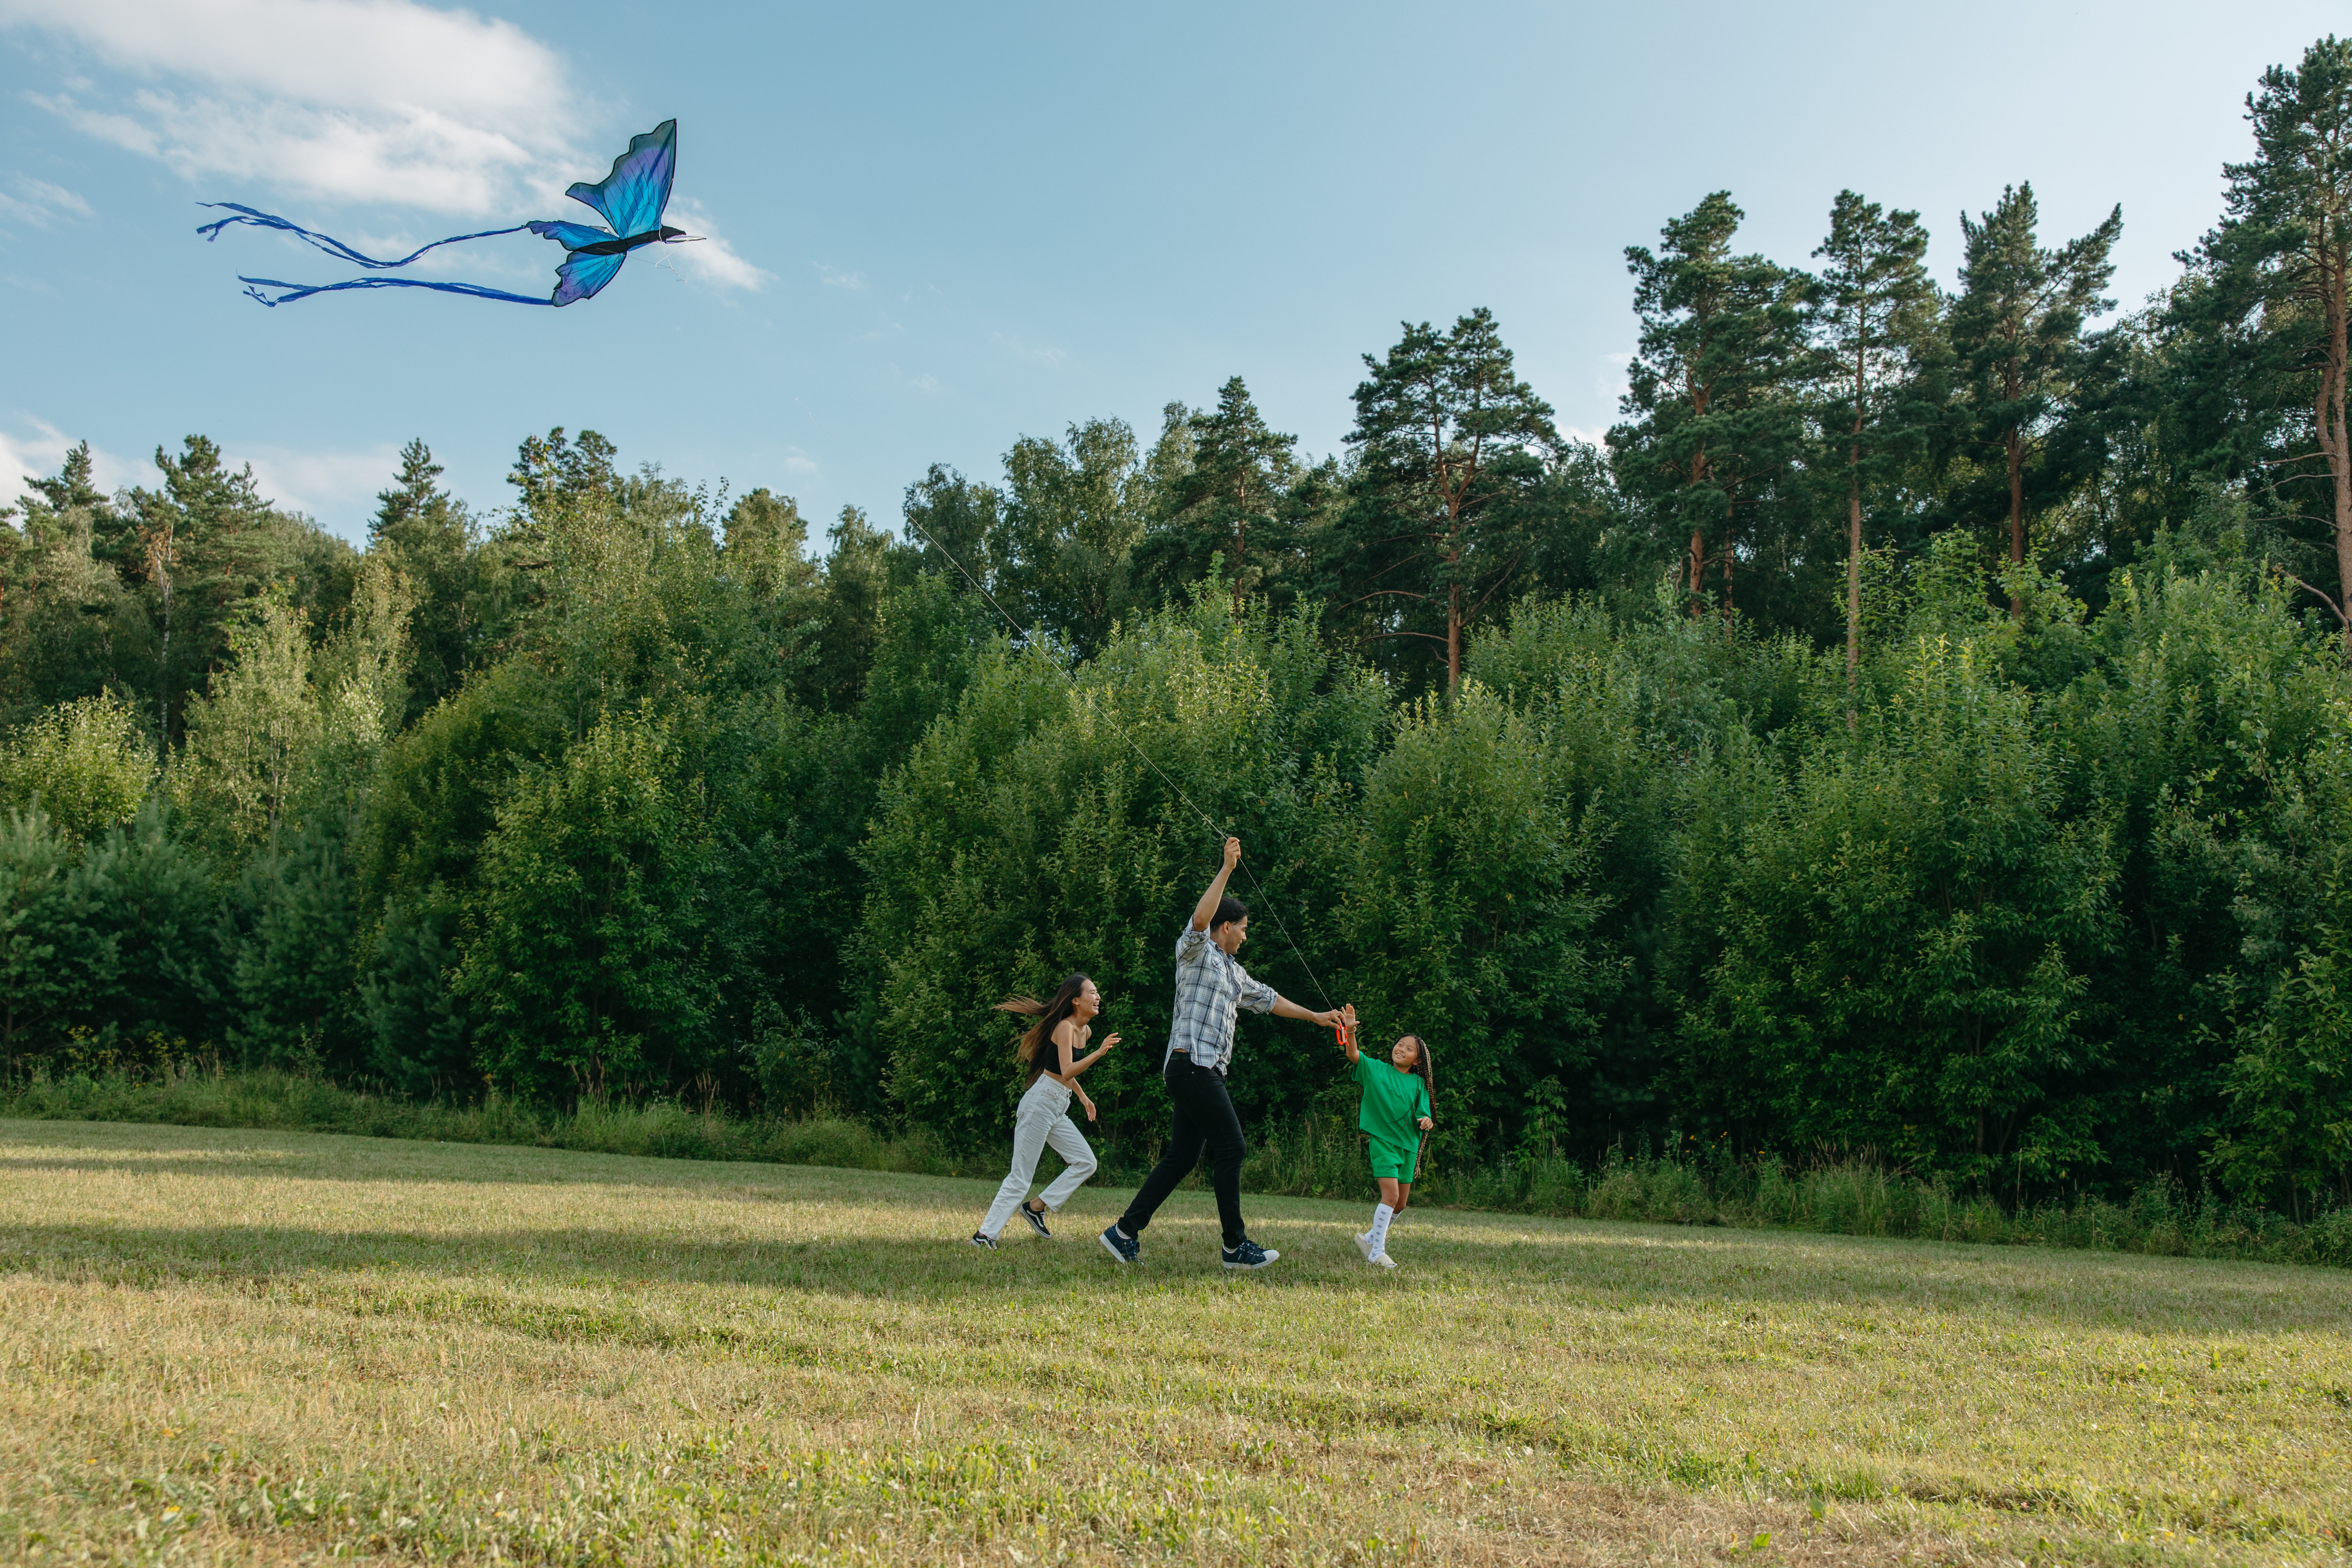 A mother flies a kite with two children